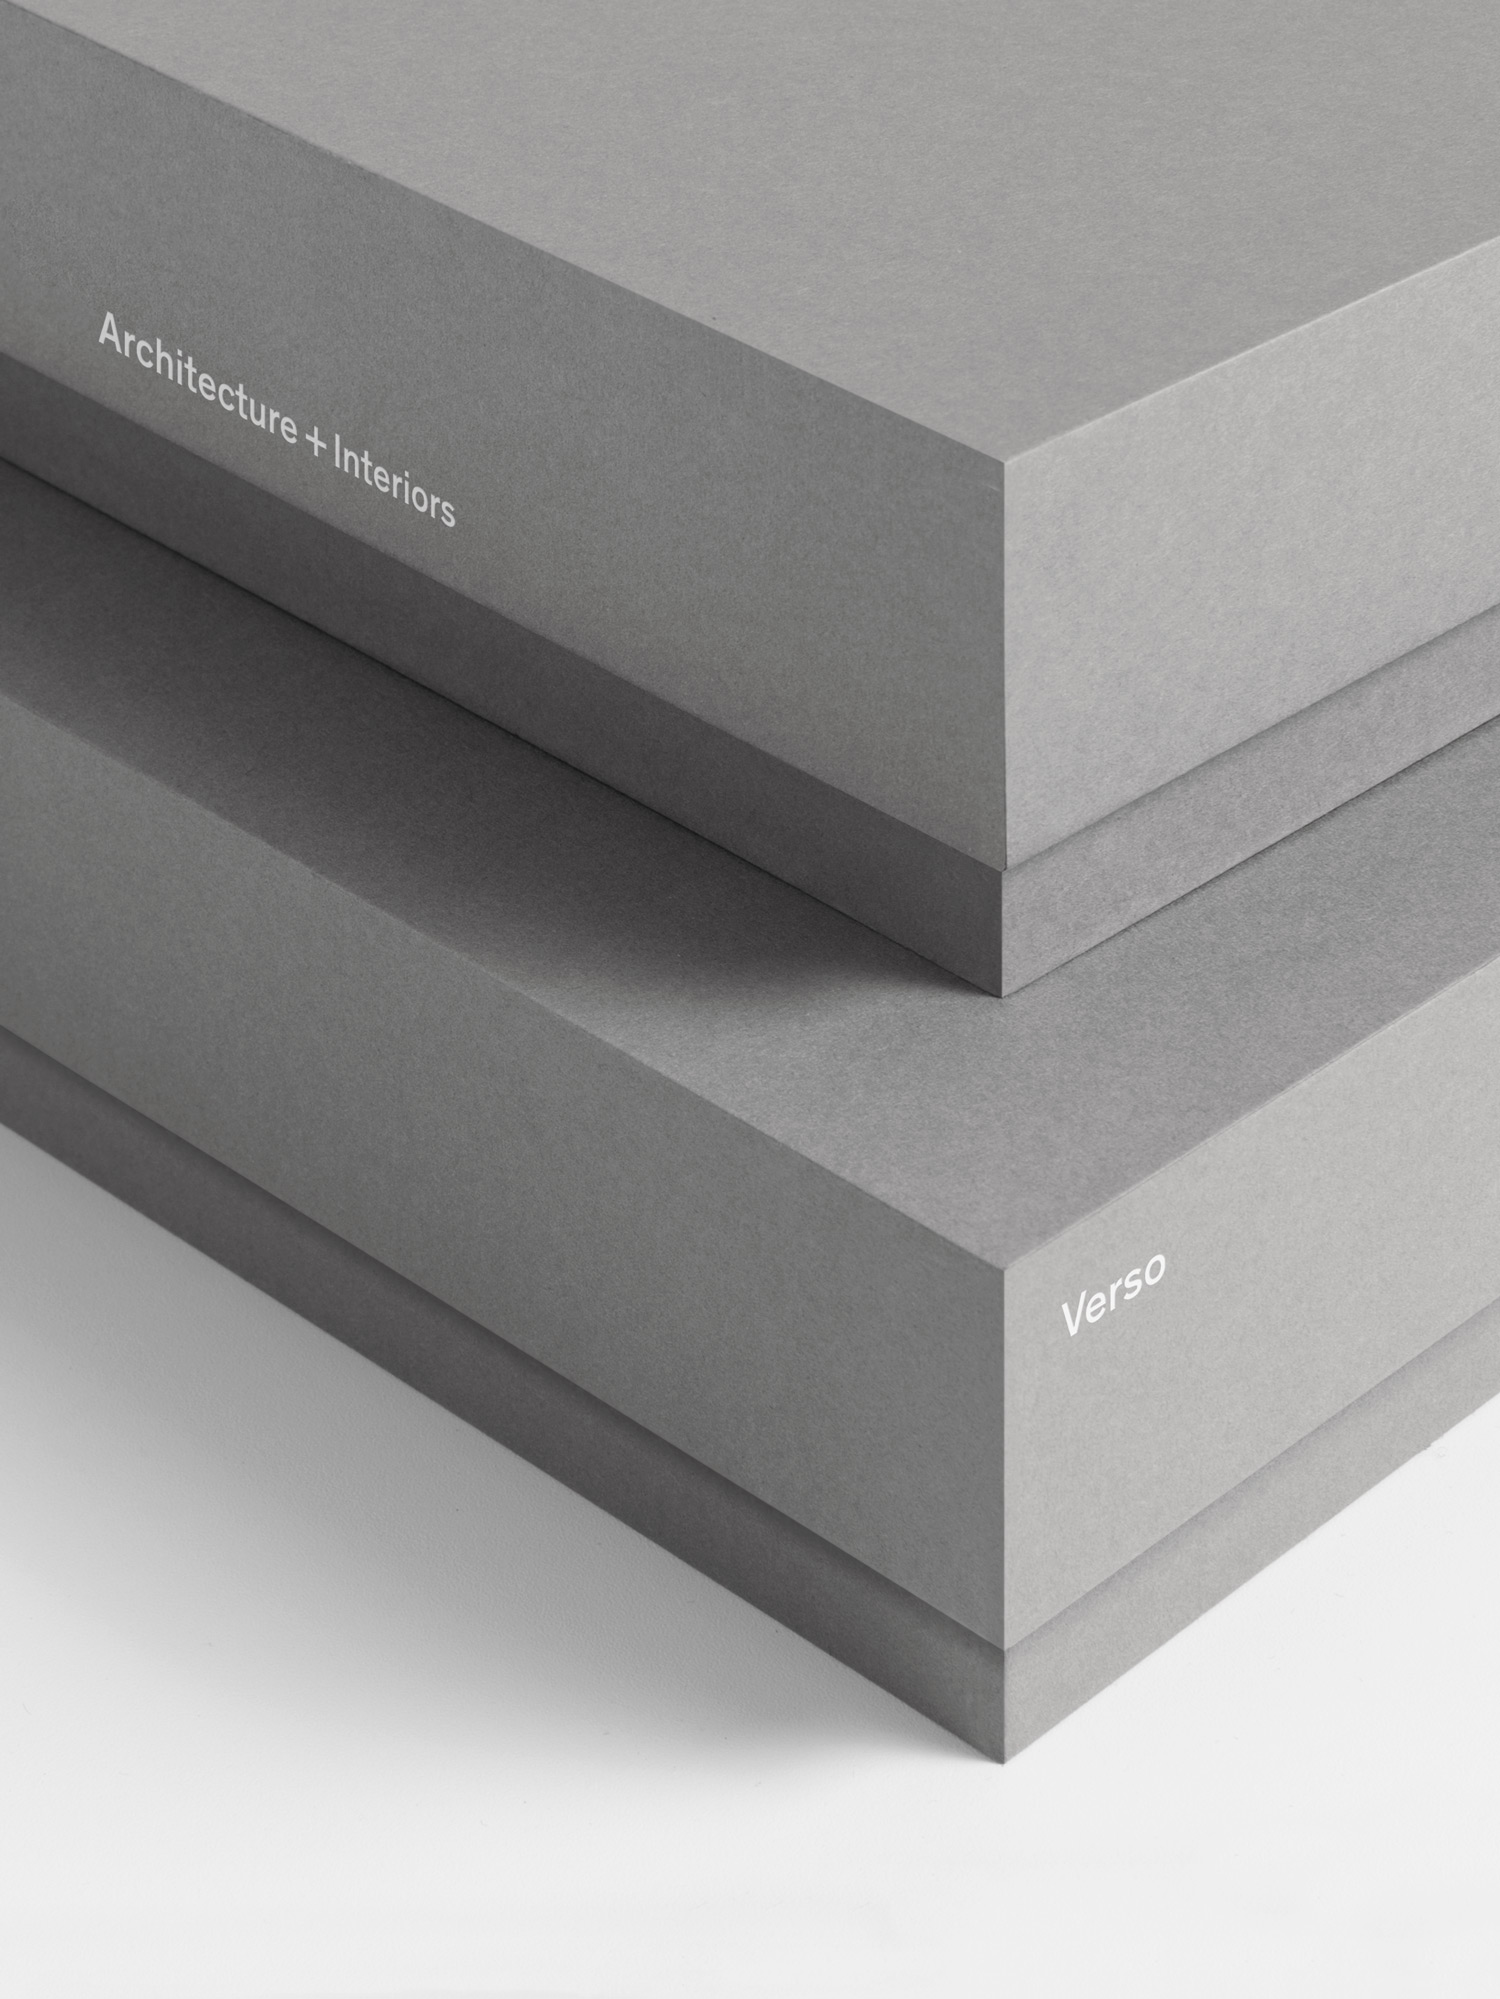 Packaging by Studio South for Auckland-based architecture and interior business Verso